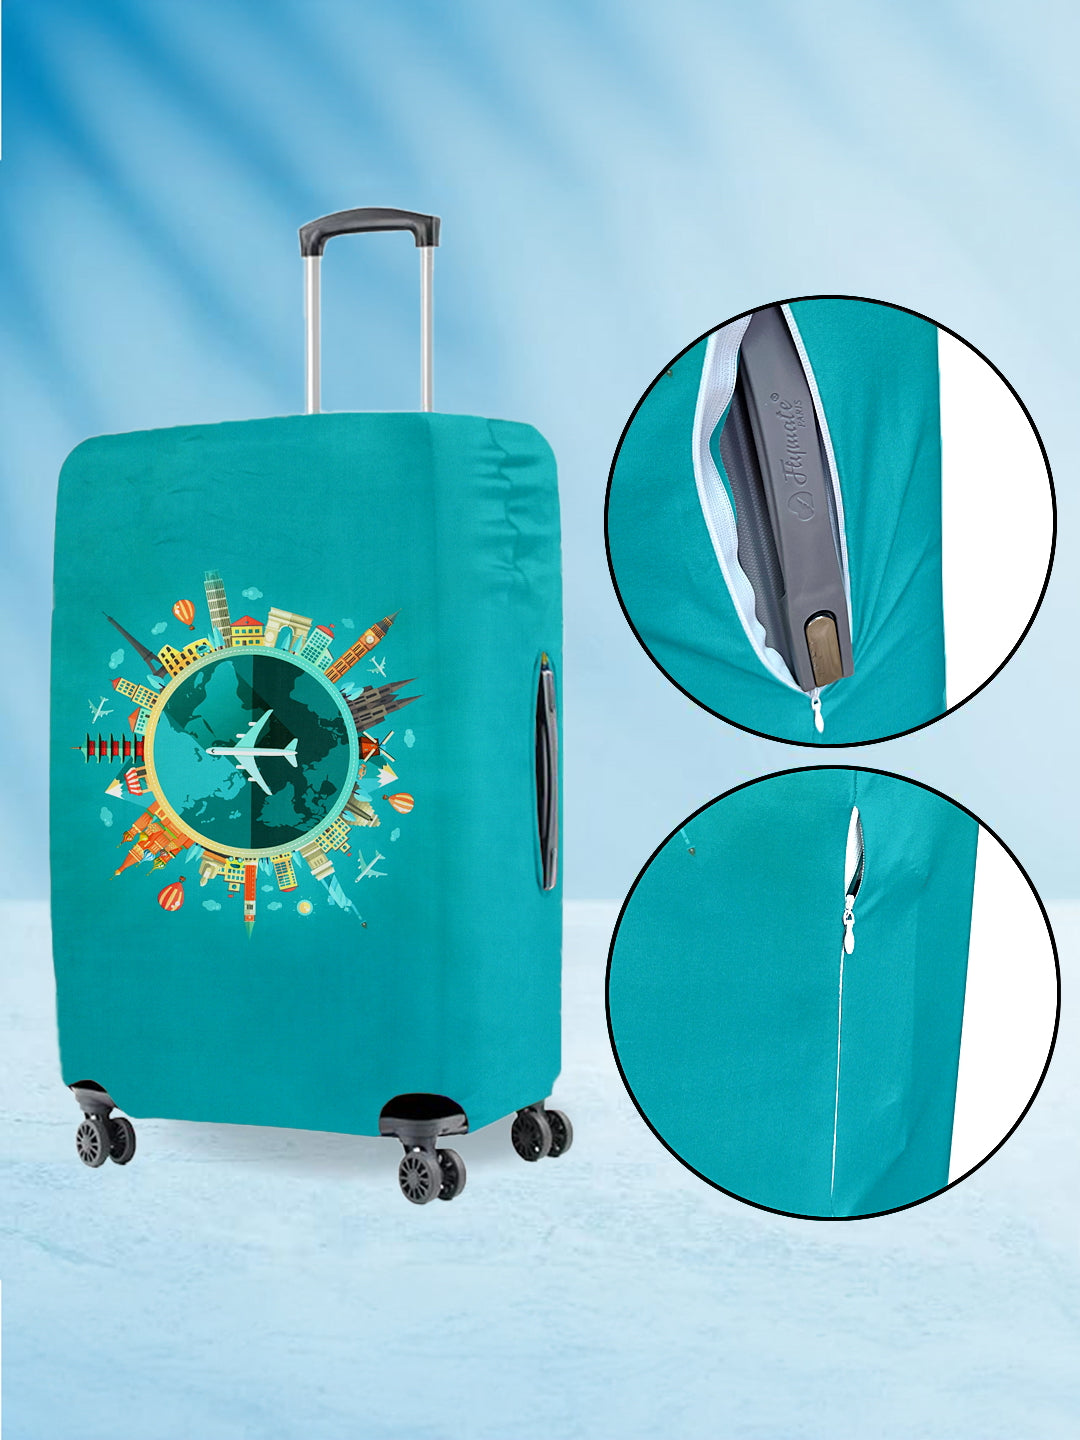 Stretchable Printed Protective Luggage Bag Cover Large- Teal